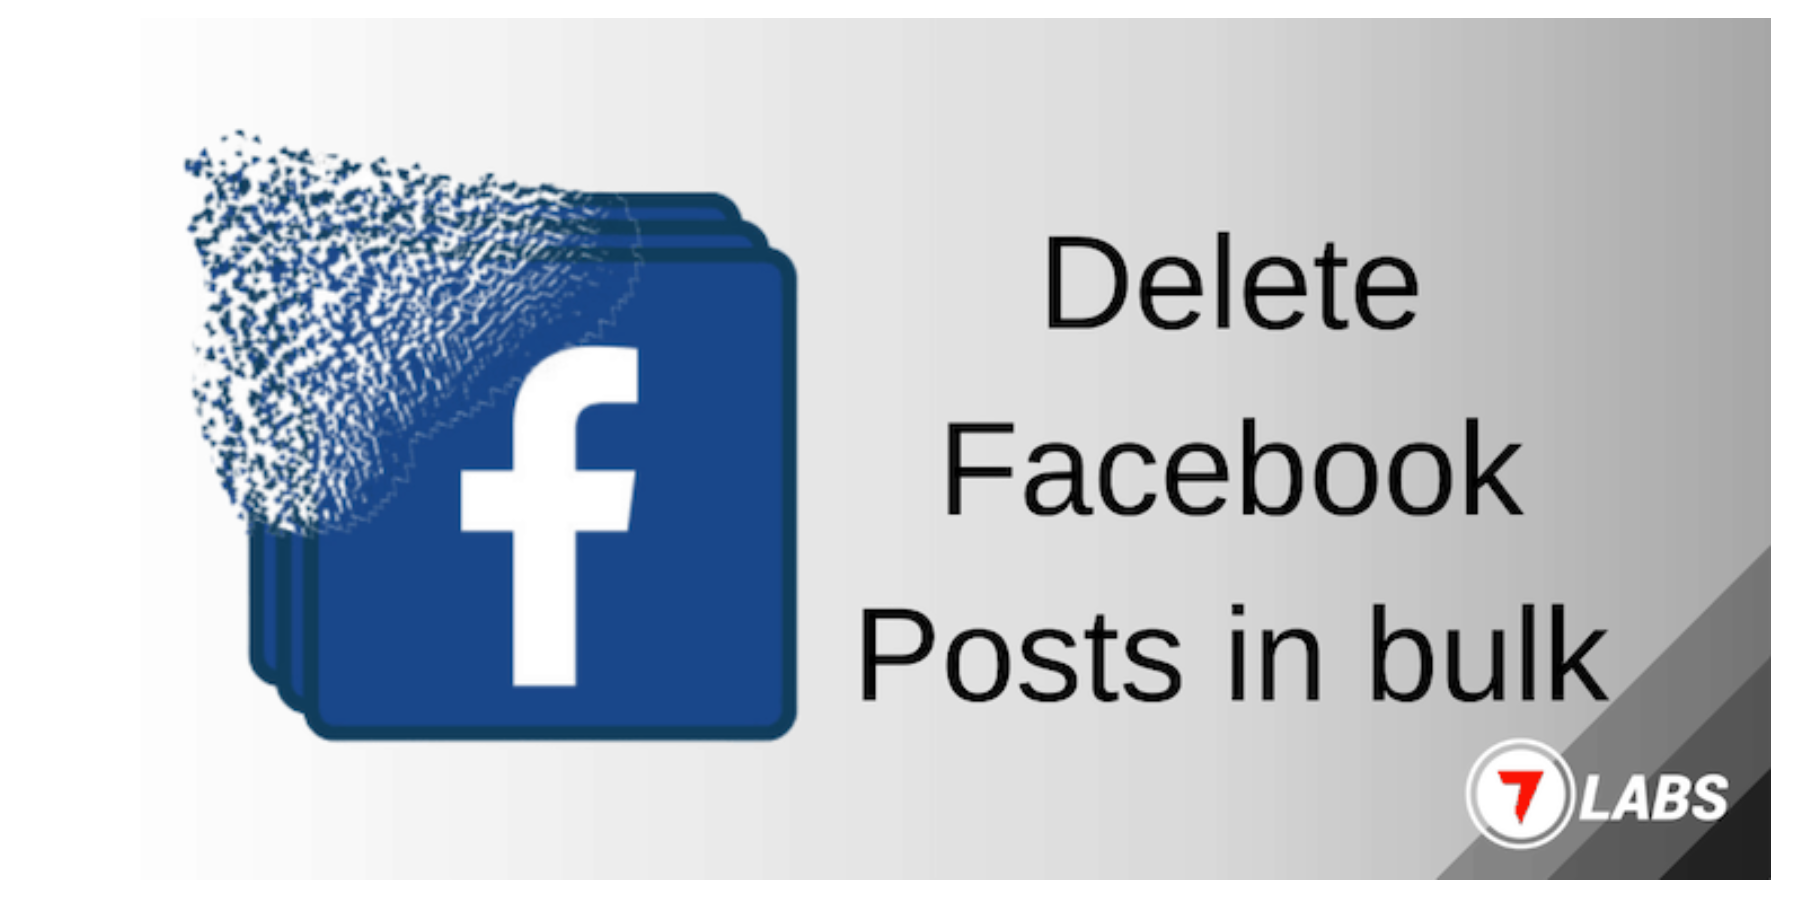 HOW TO DELETE ALL FACEBOOK POSTS IN BULK